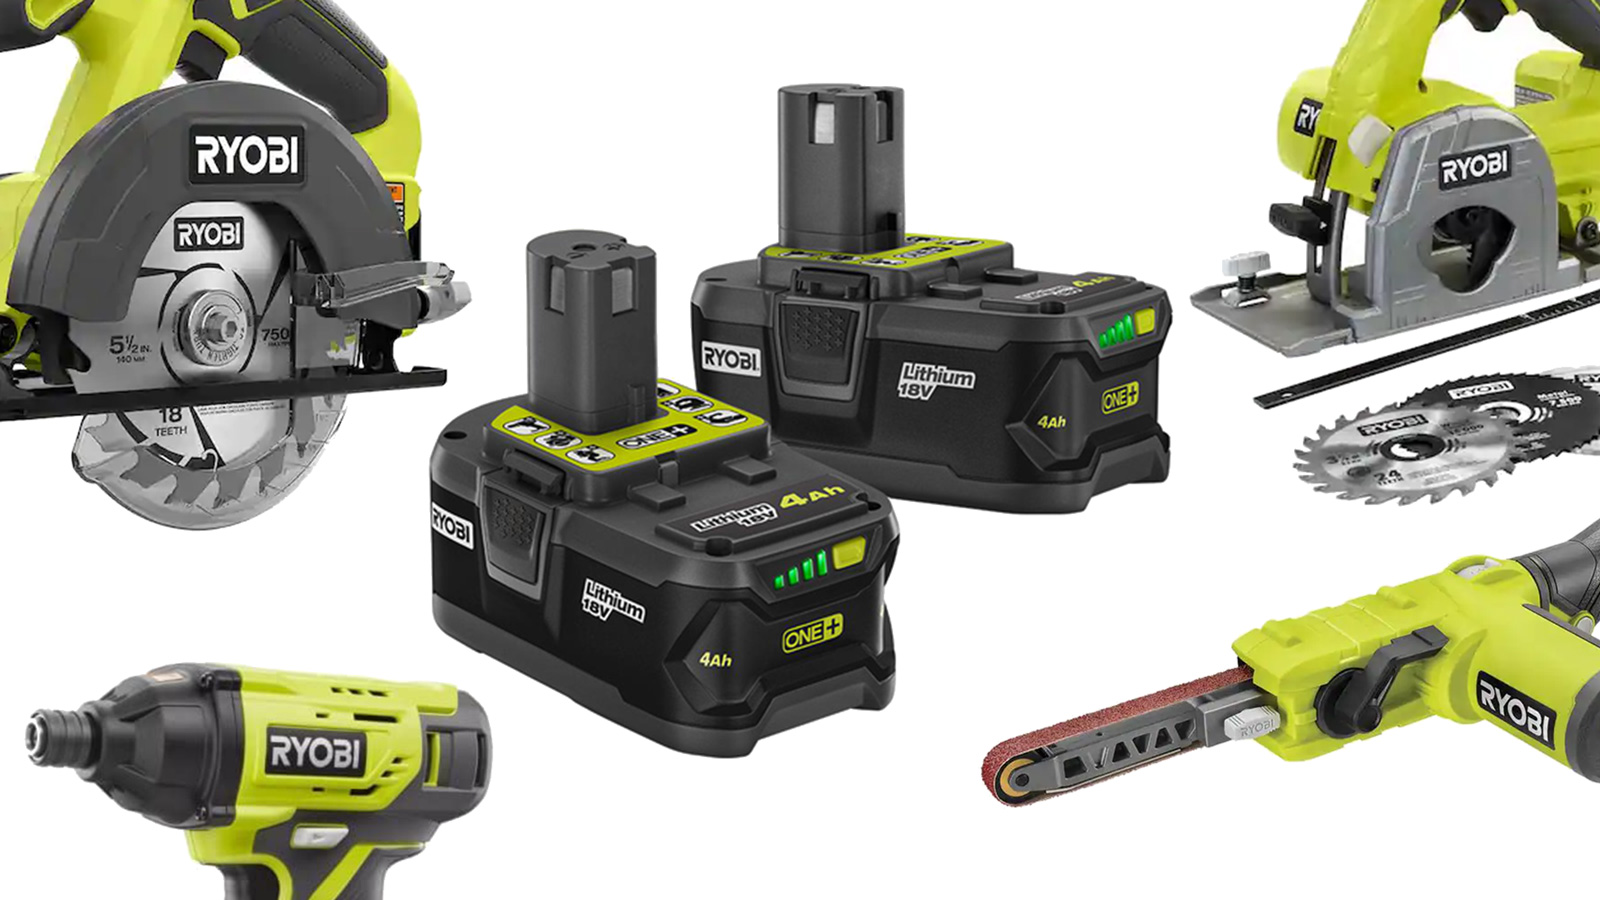 Ryobi's ONE+ System. One Battery. Over 100 Tools. For the Home & Garden. 